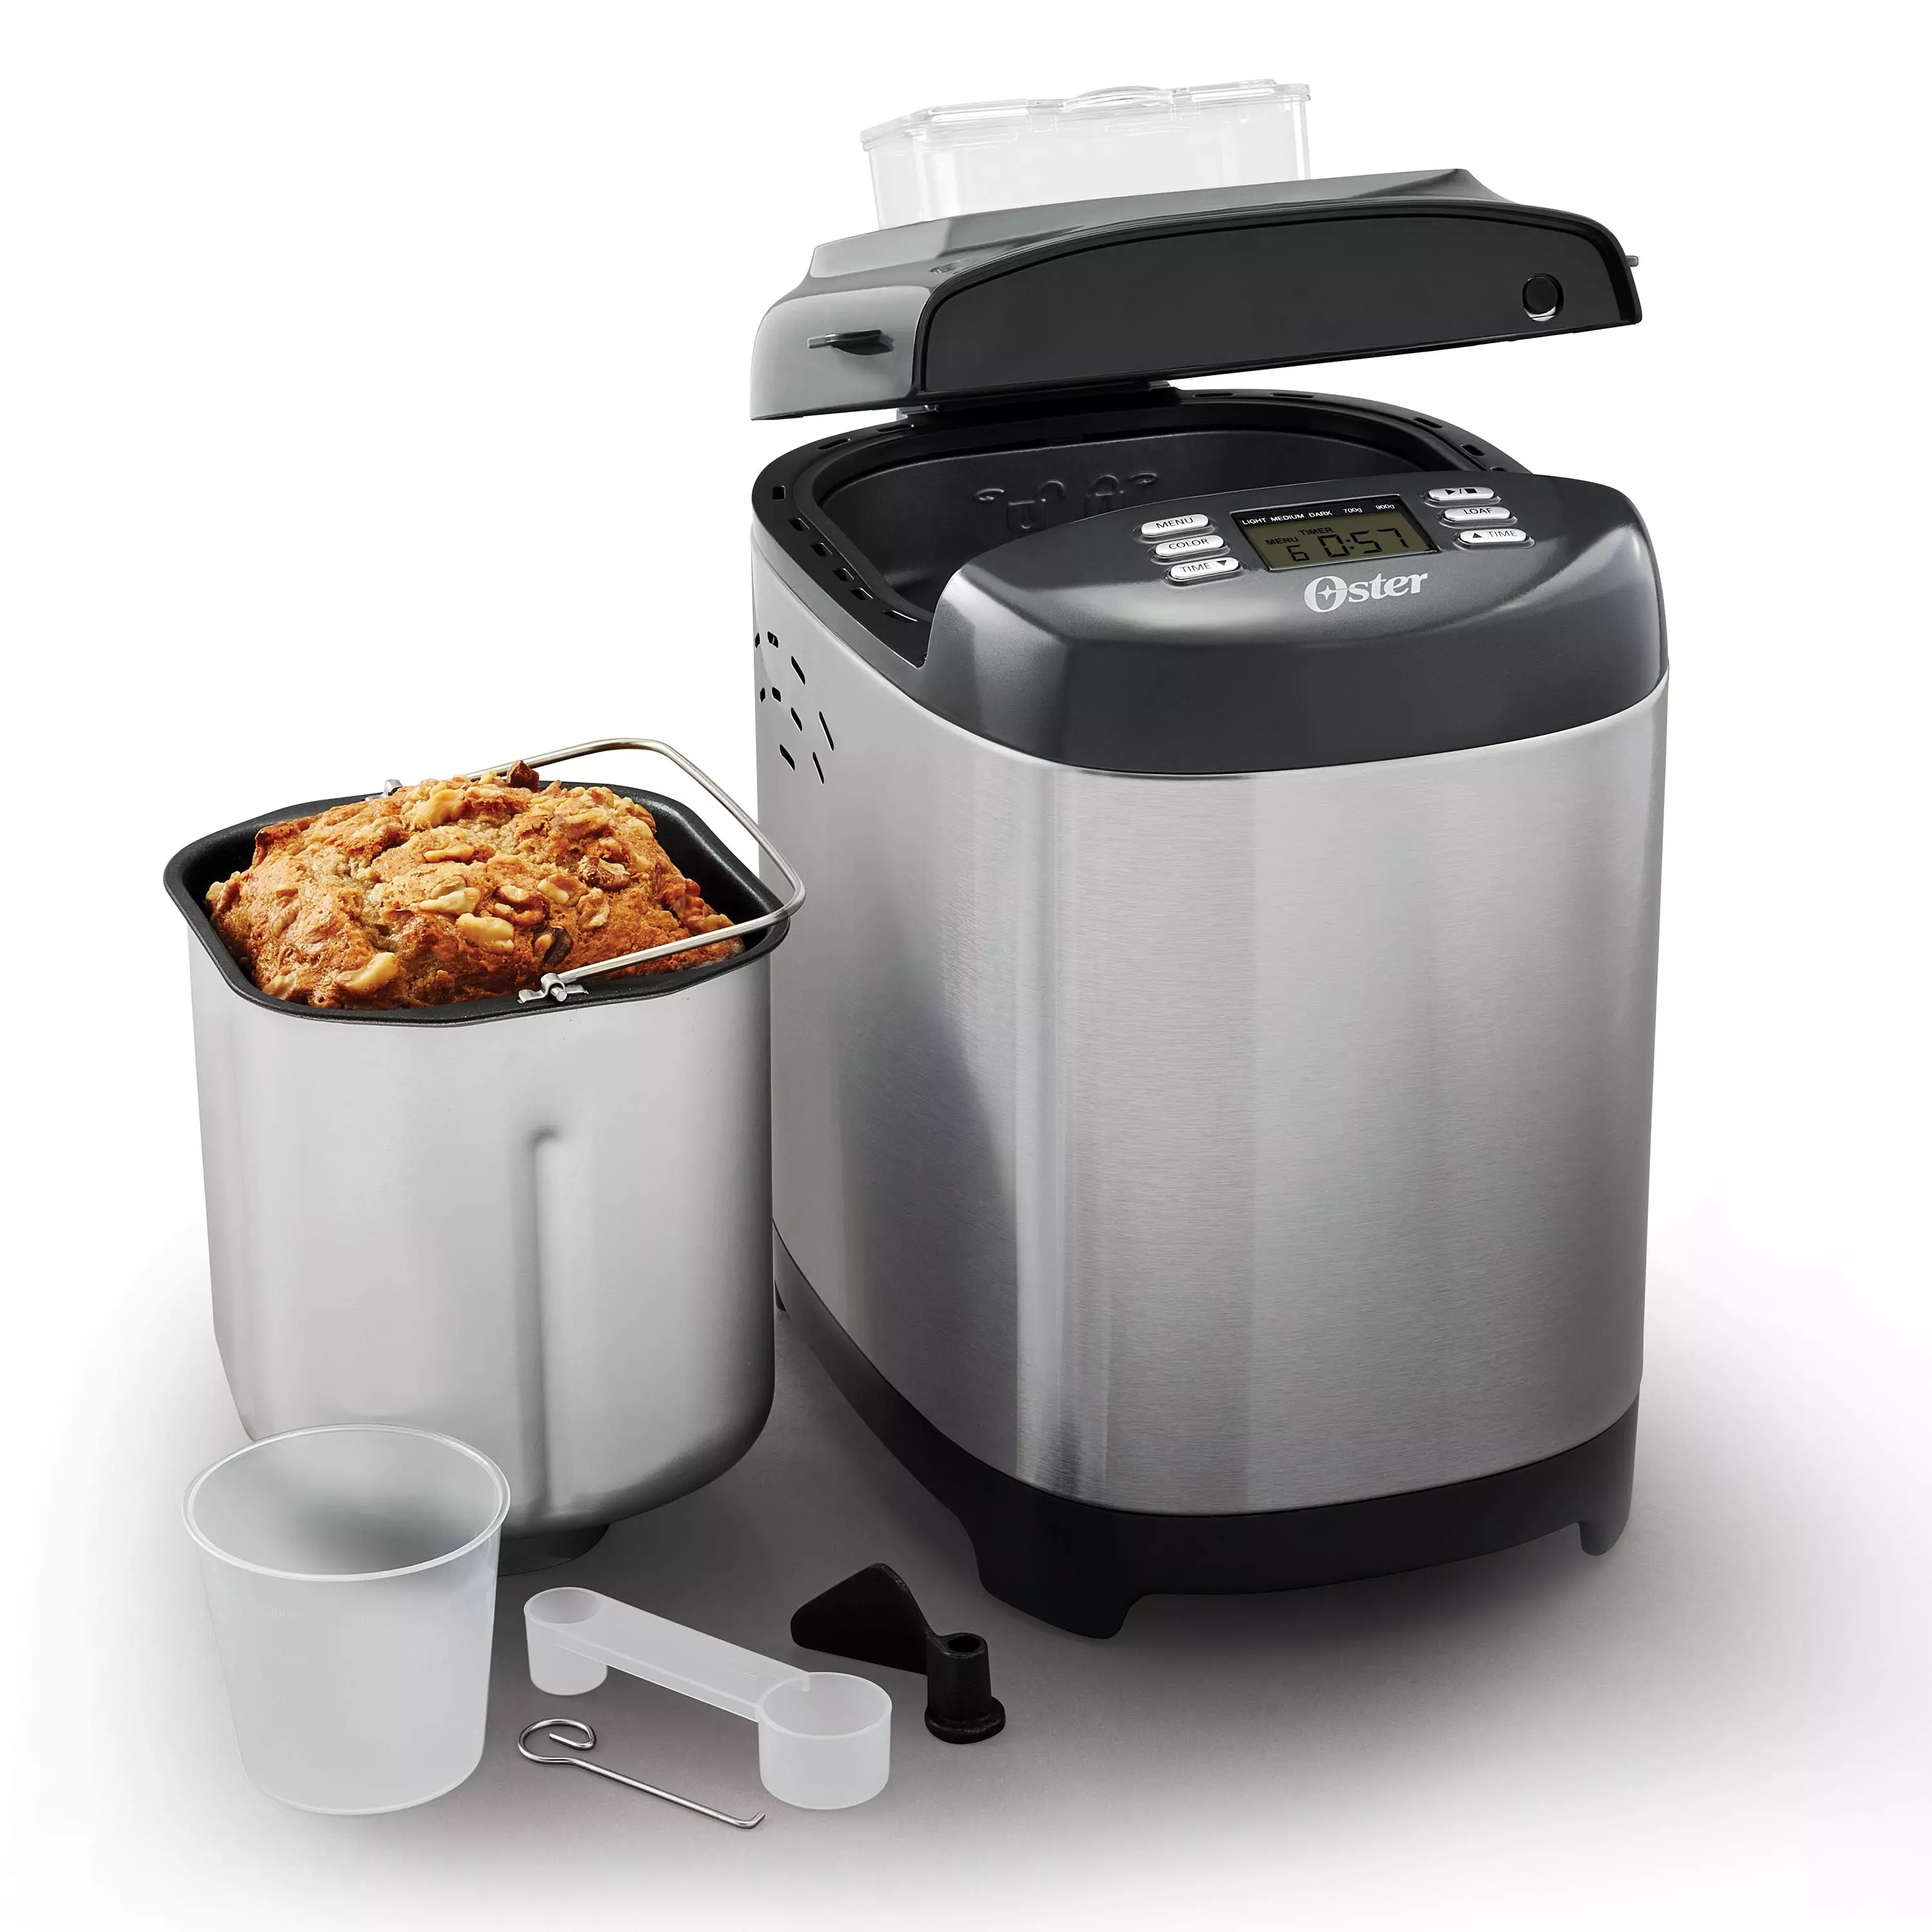 Oster Bread Maker With ExpressBake